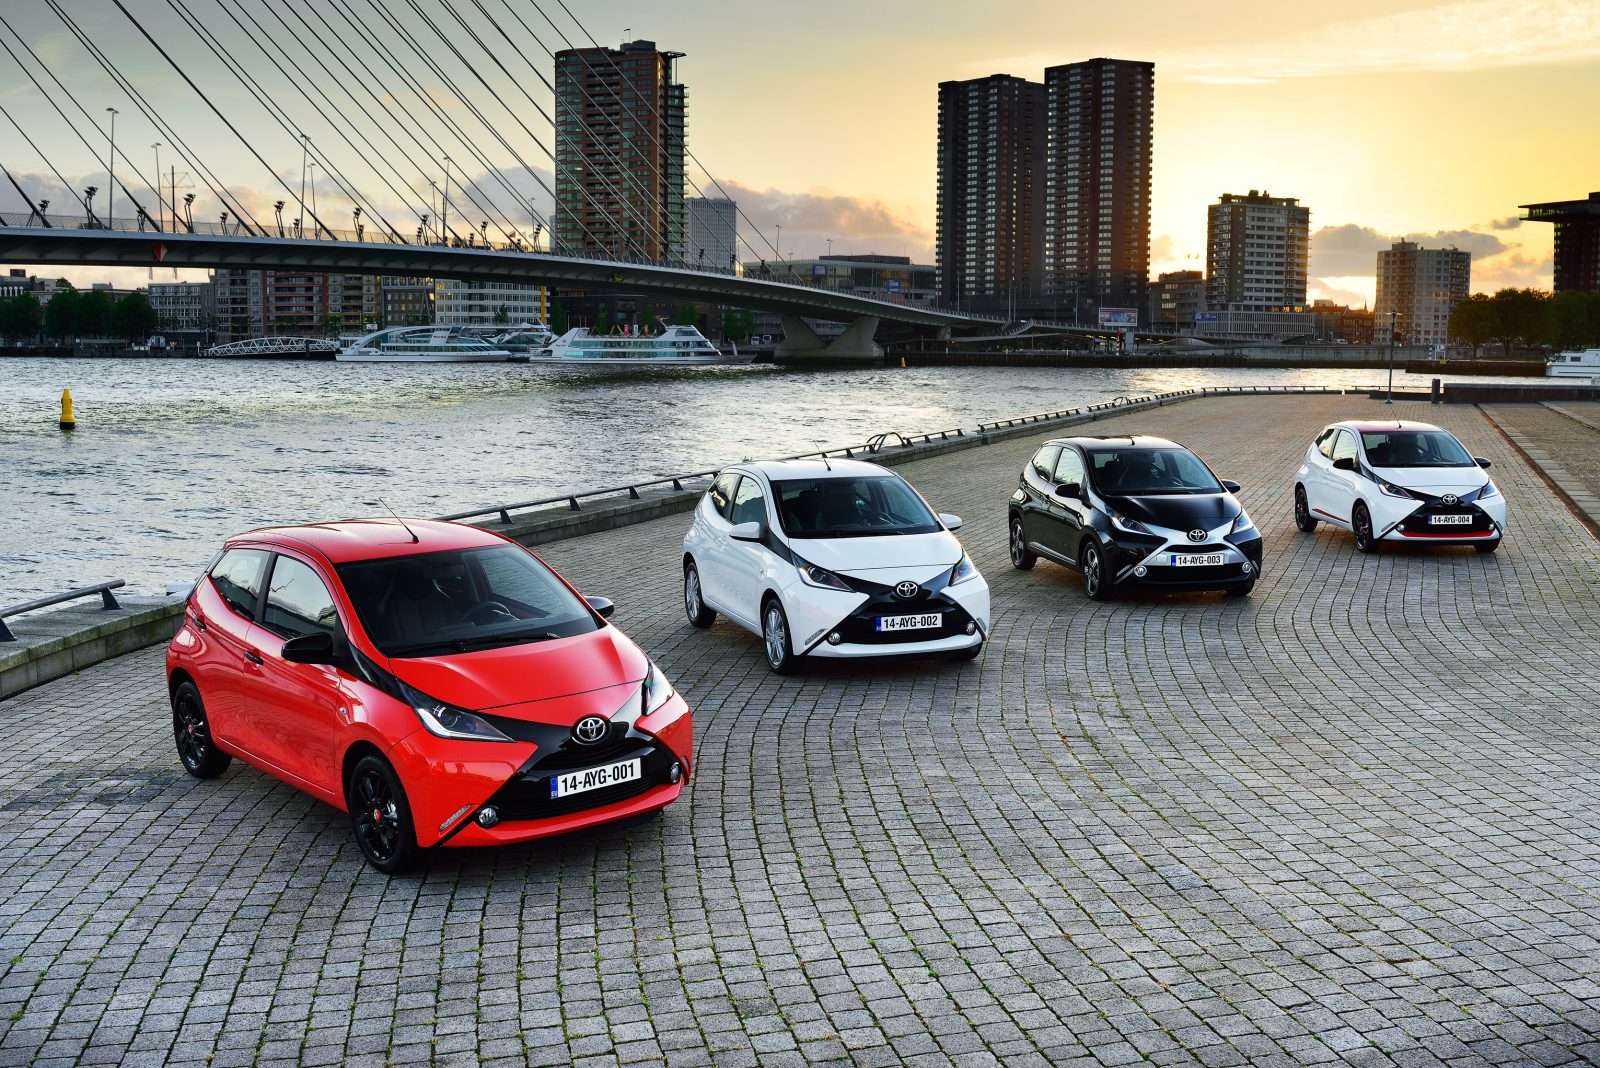 Toyota Aygo X-Play (2018) Quick Review